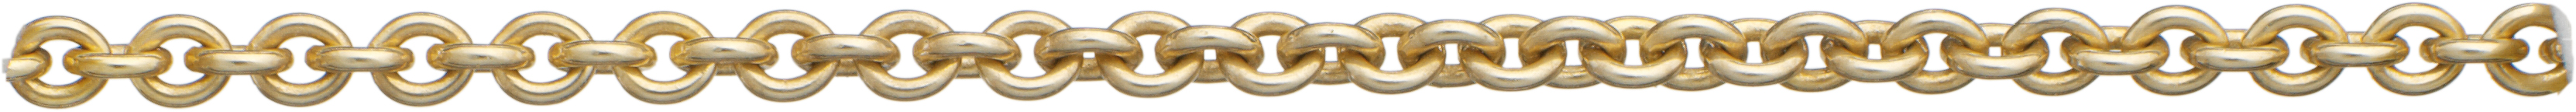 Anchor chain round gold 585/- 2.30mm, wire thickness 0.60mm